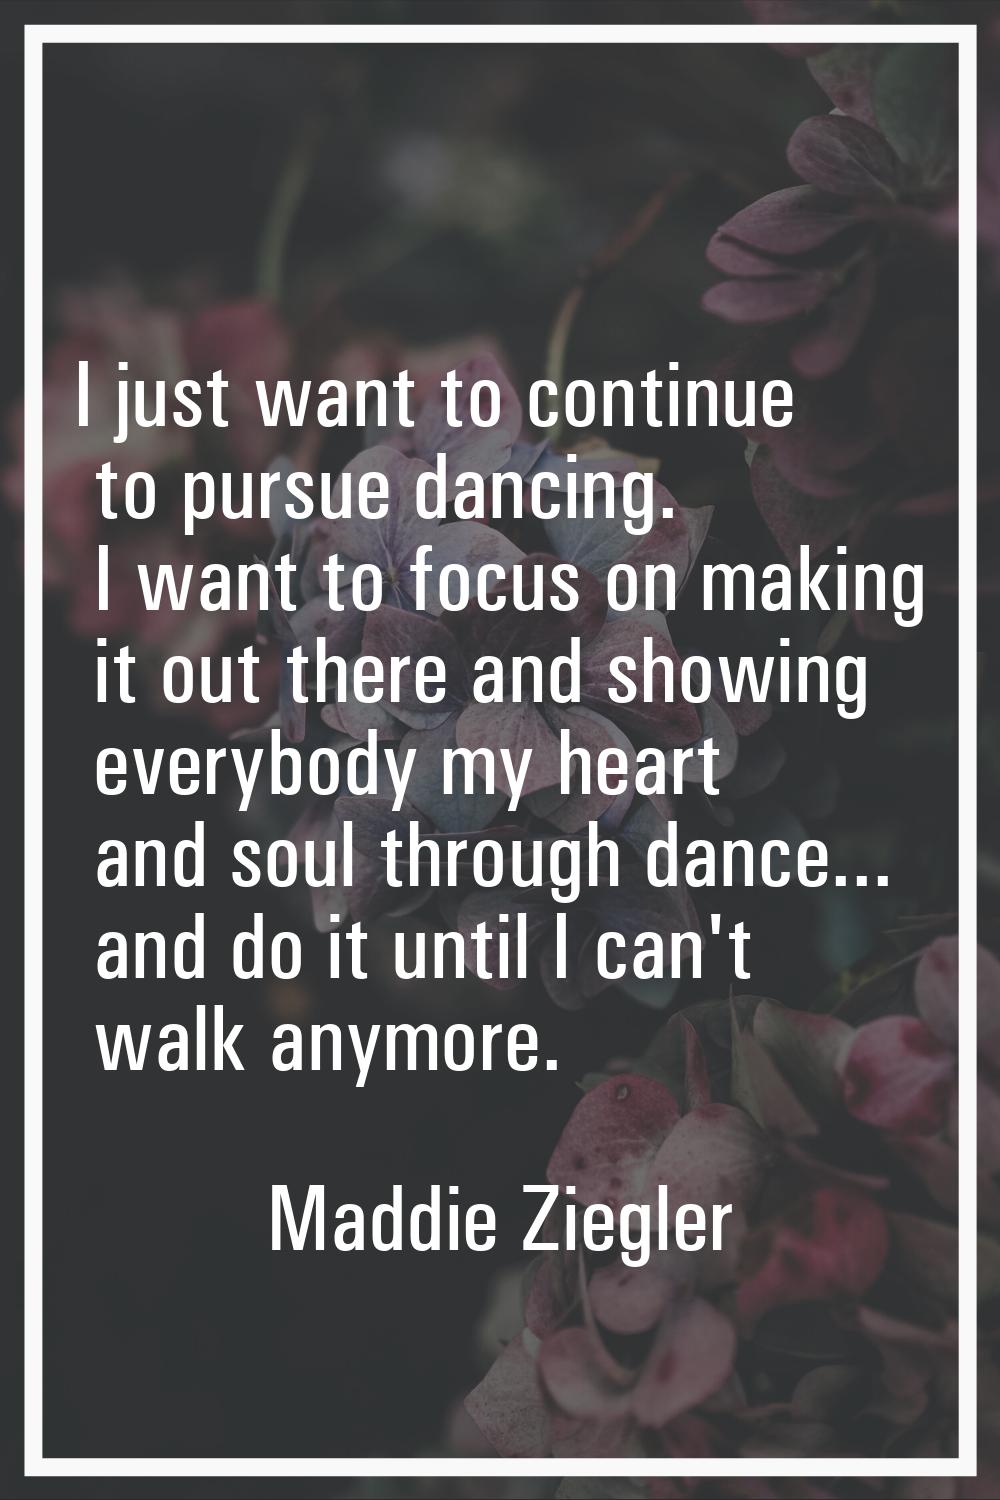 I just want to continue to pursue dancing. I want to focus on making it out there and showing every